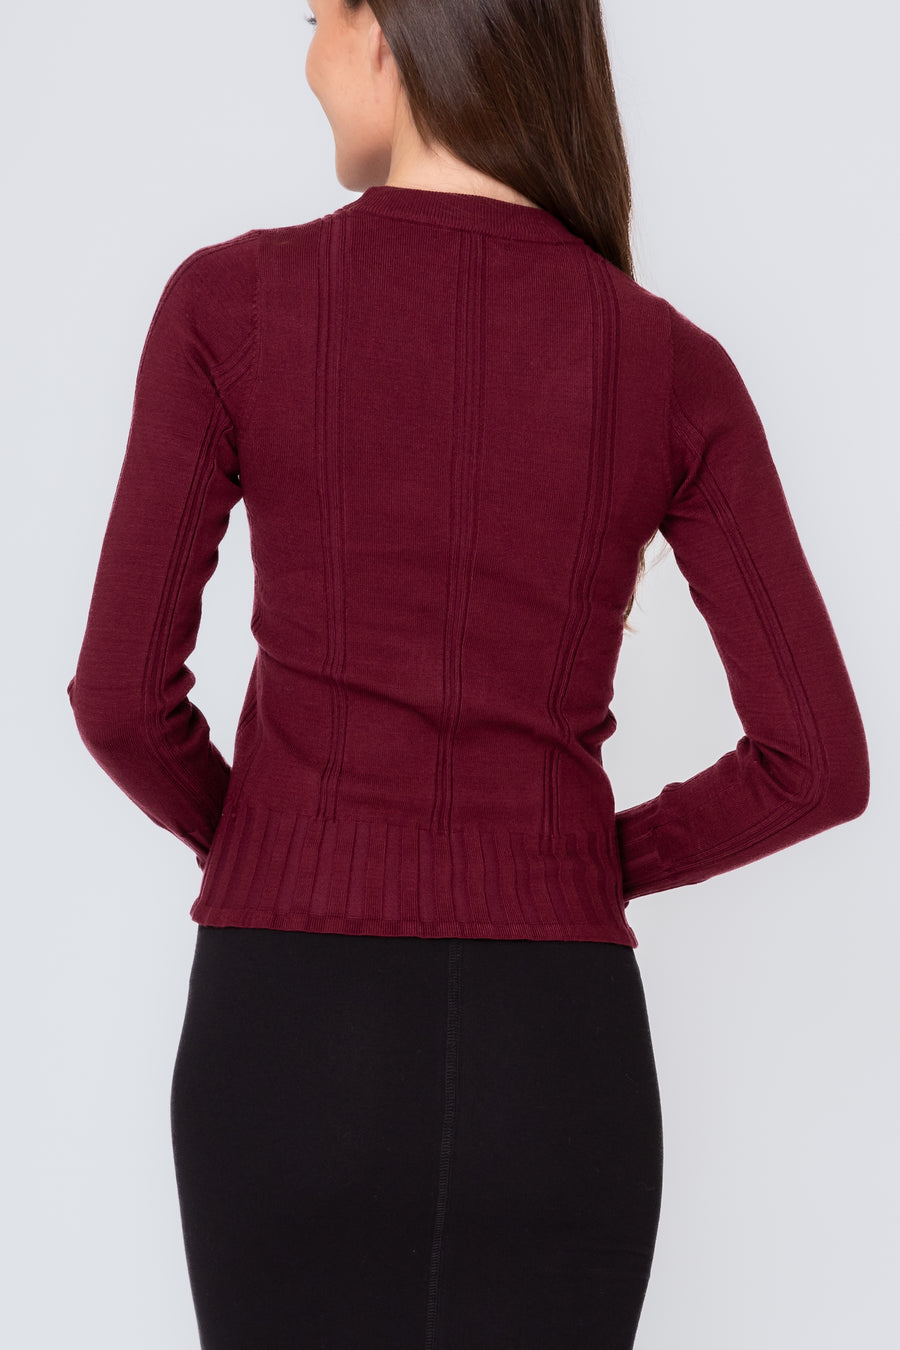 CLAIRE TOP (Burgundy)